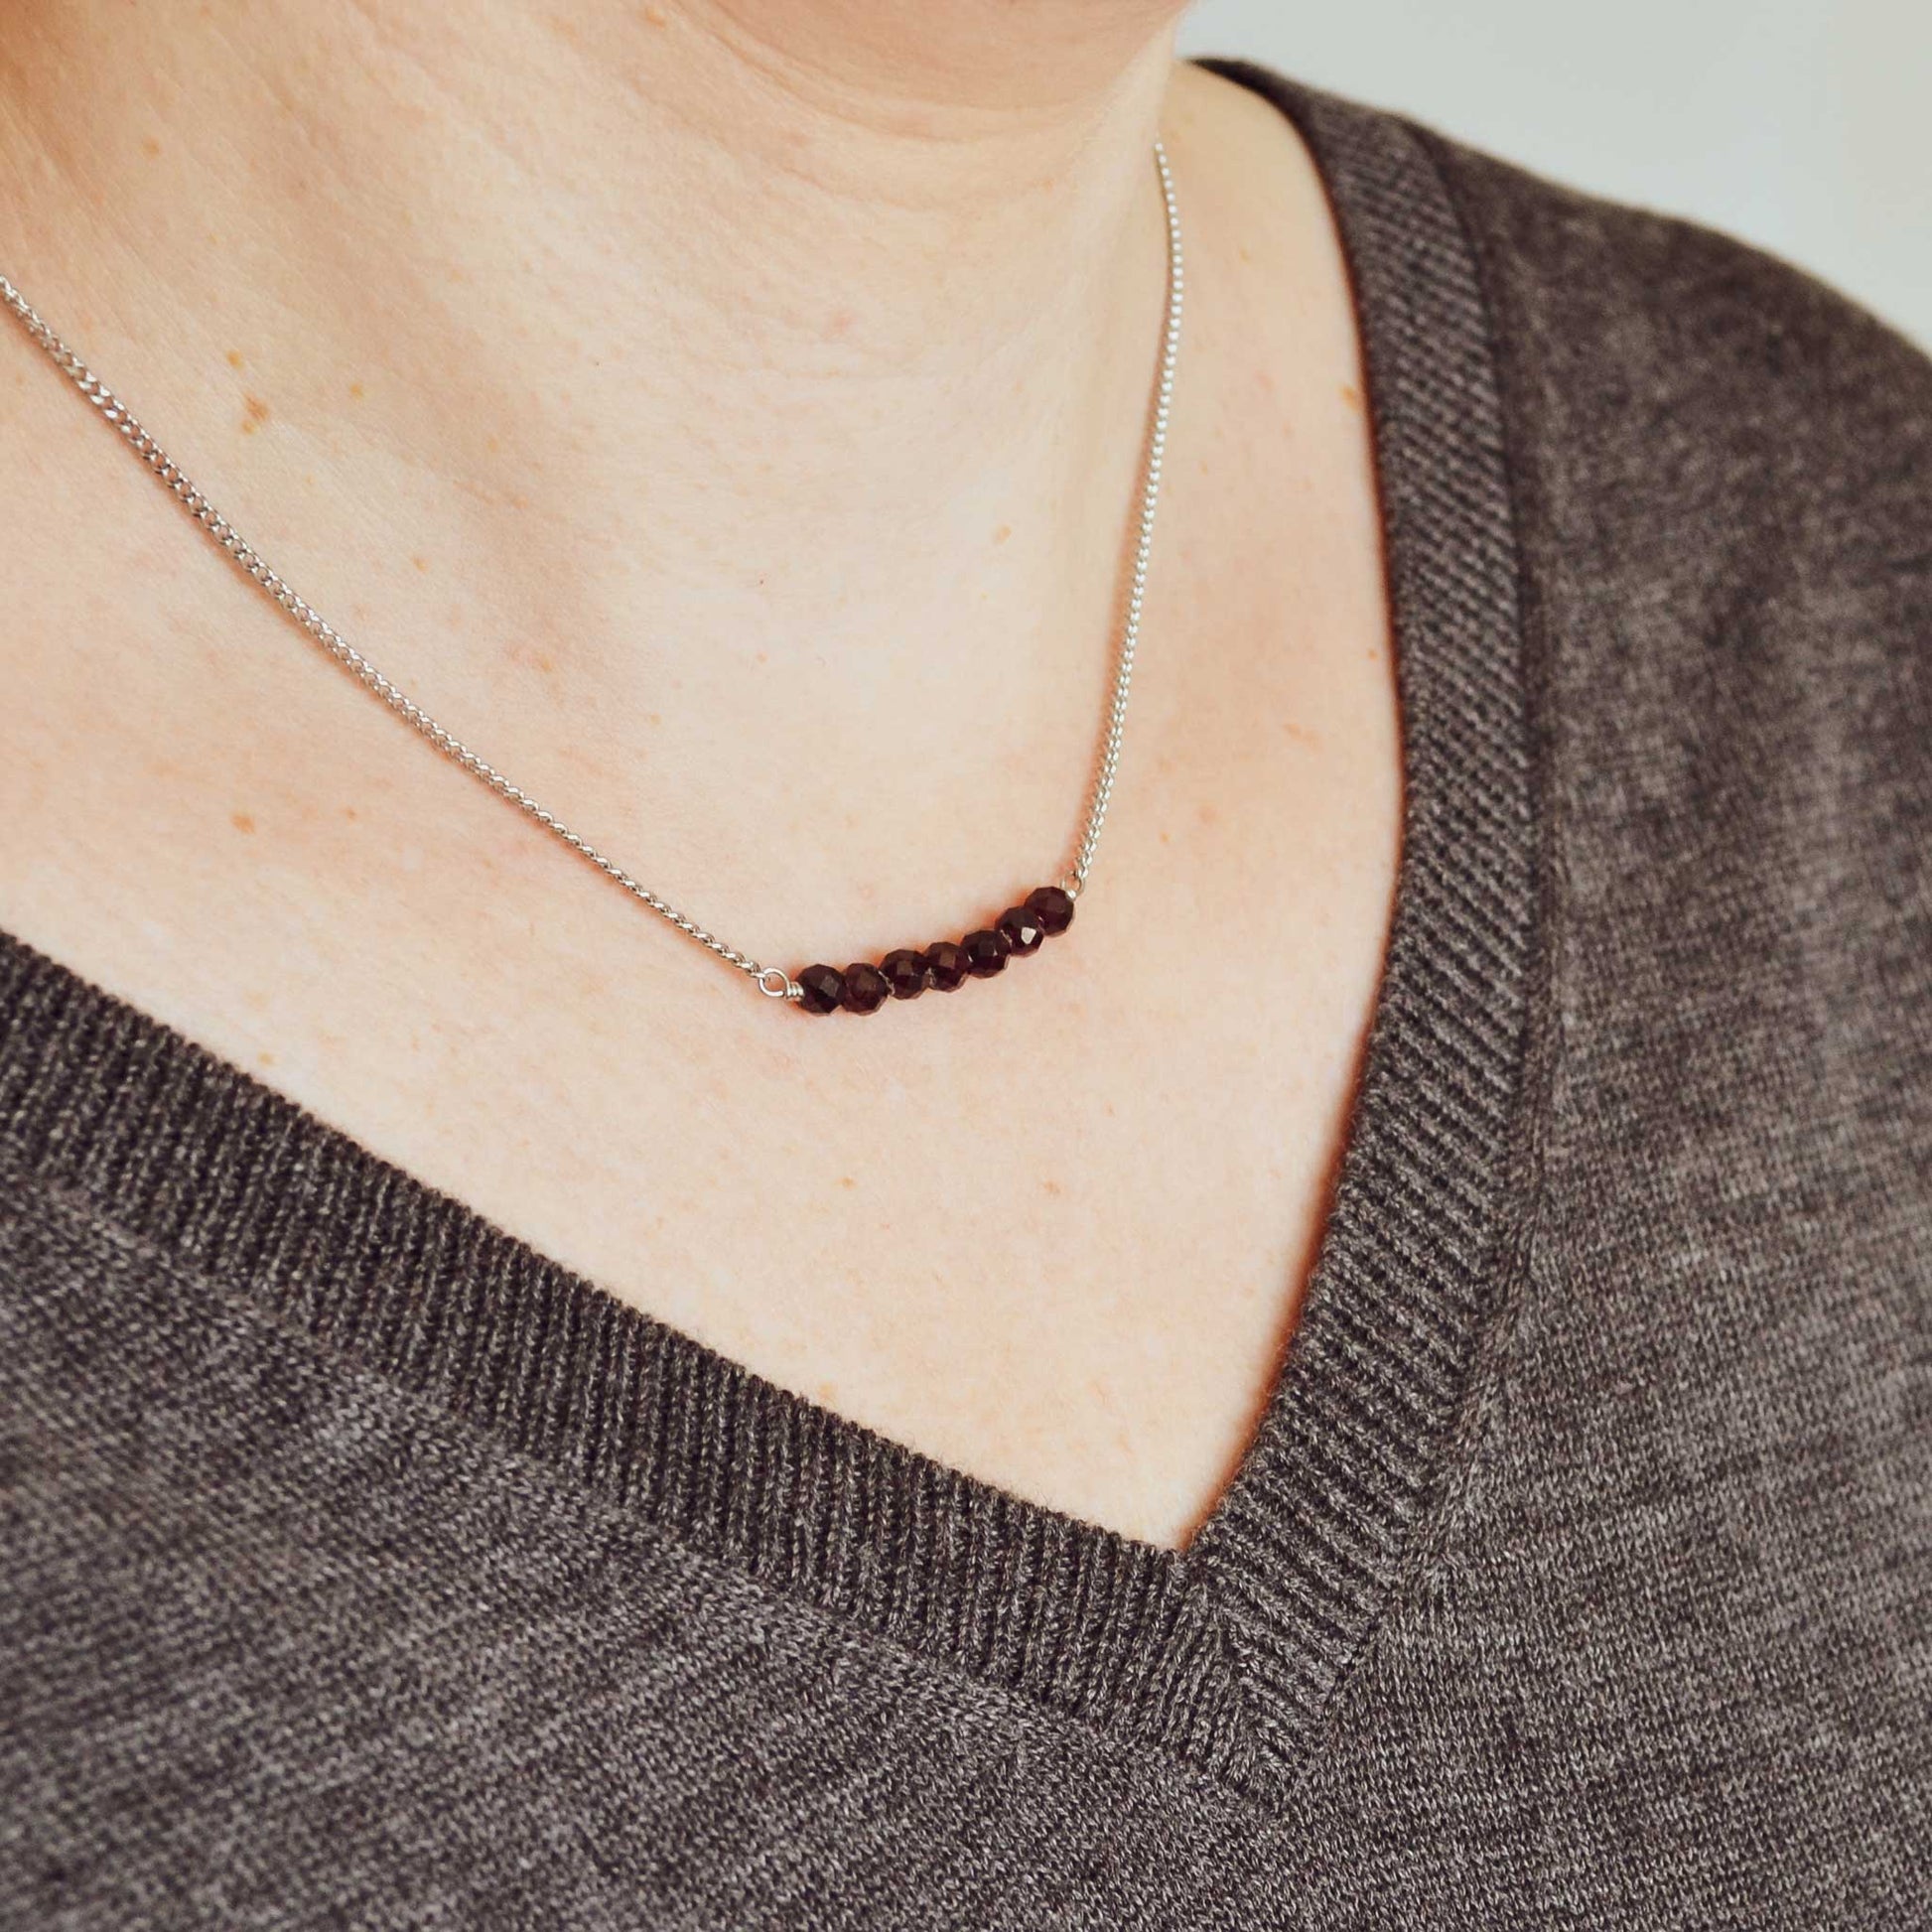 Woman wearing grey v neck jumper and dainty Garnet crystal necklace